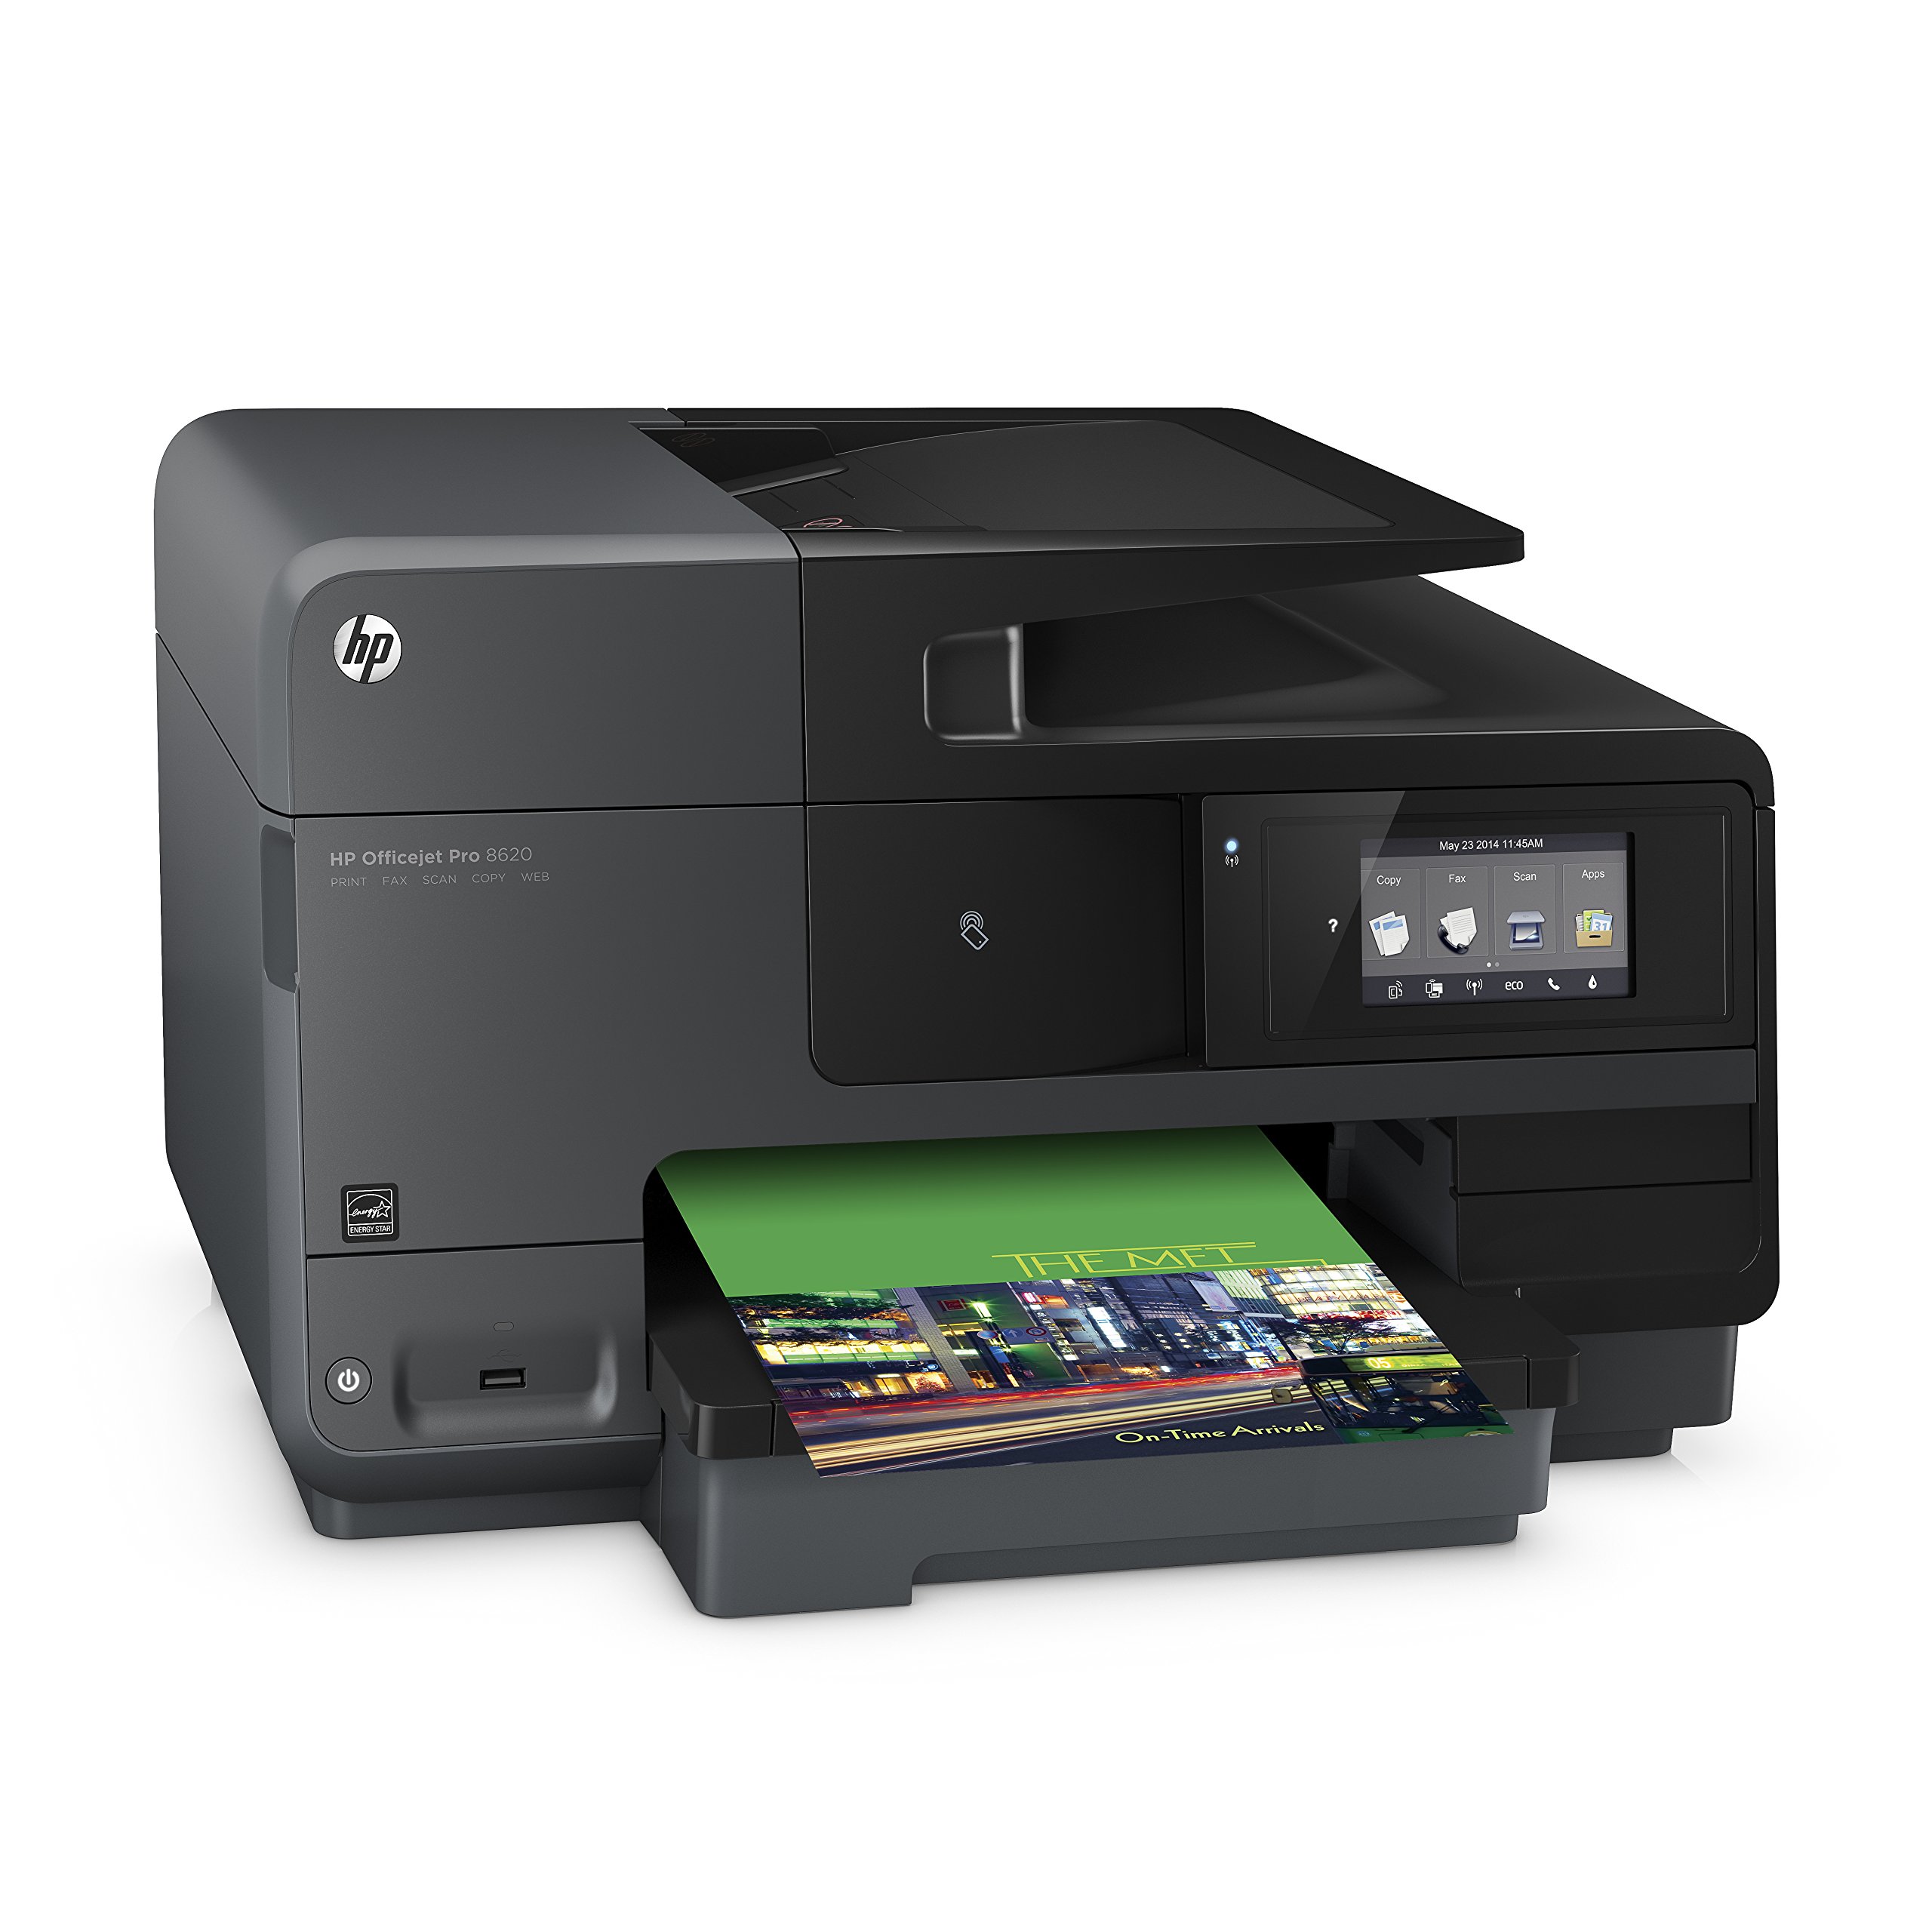 Officejet Pro 8620 e-All-in-One Printer series